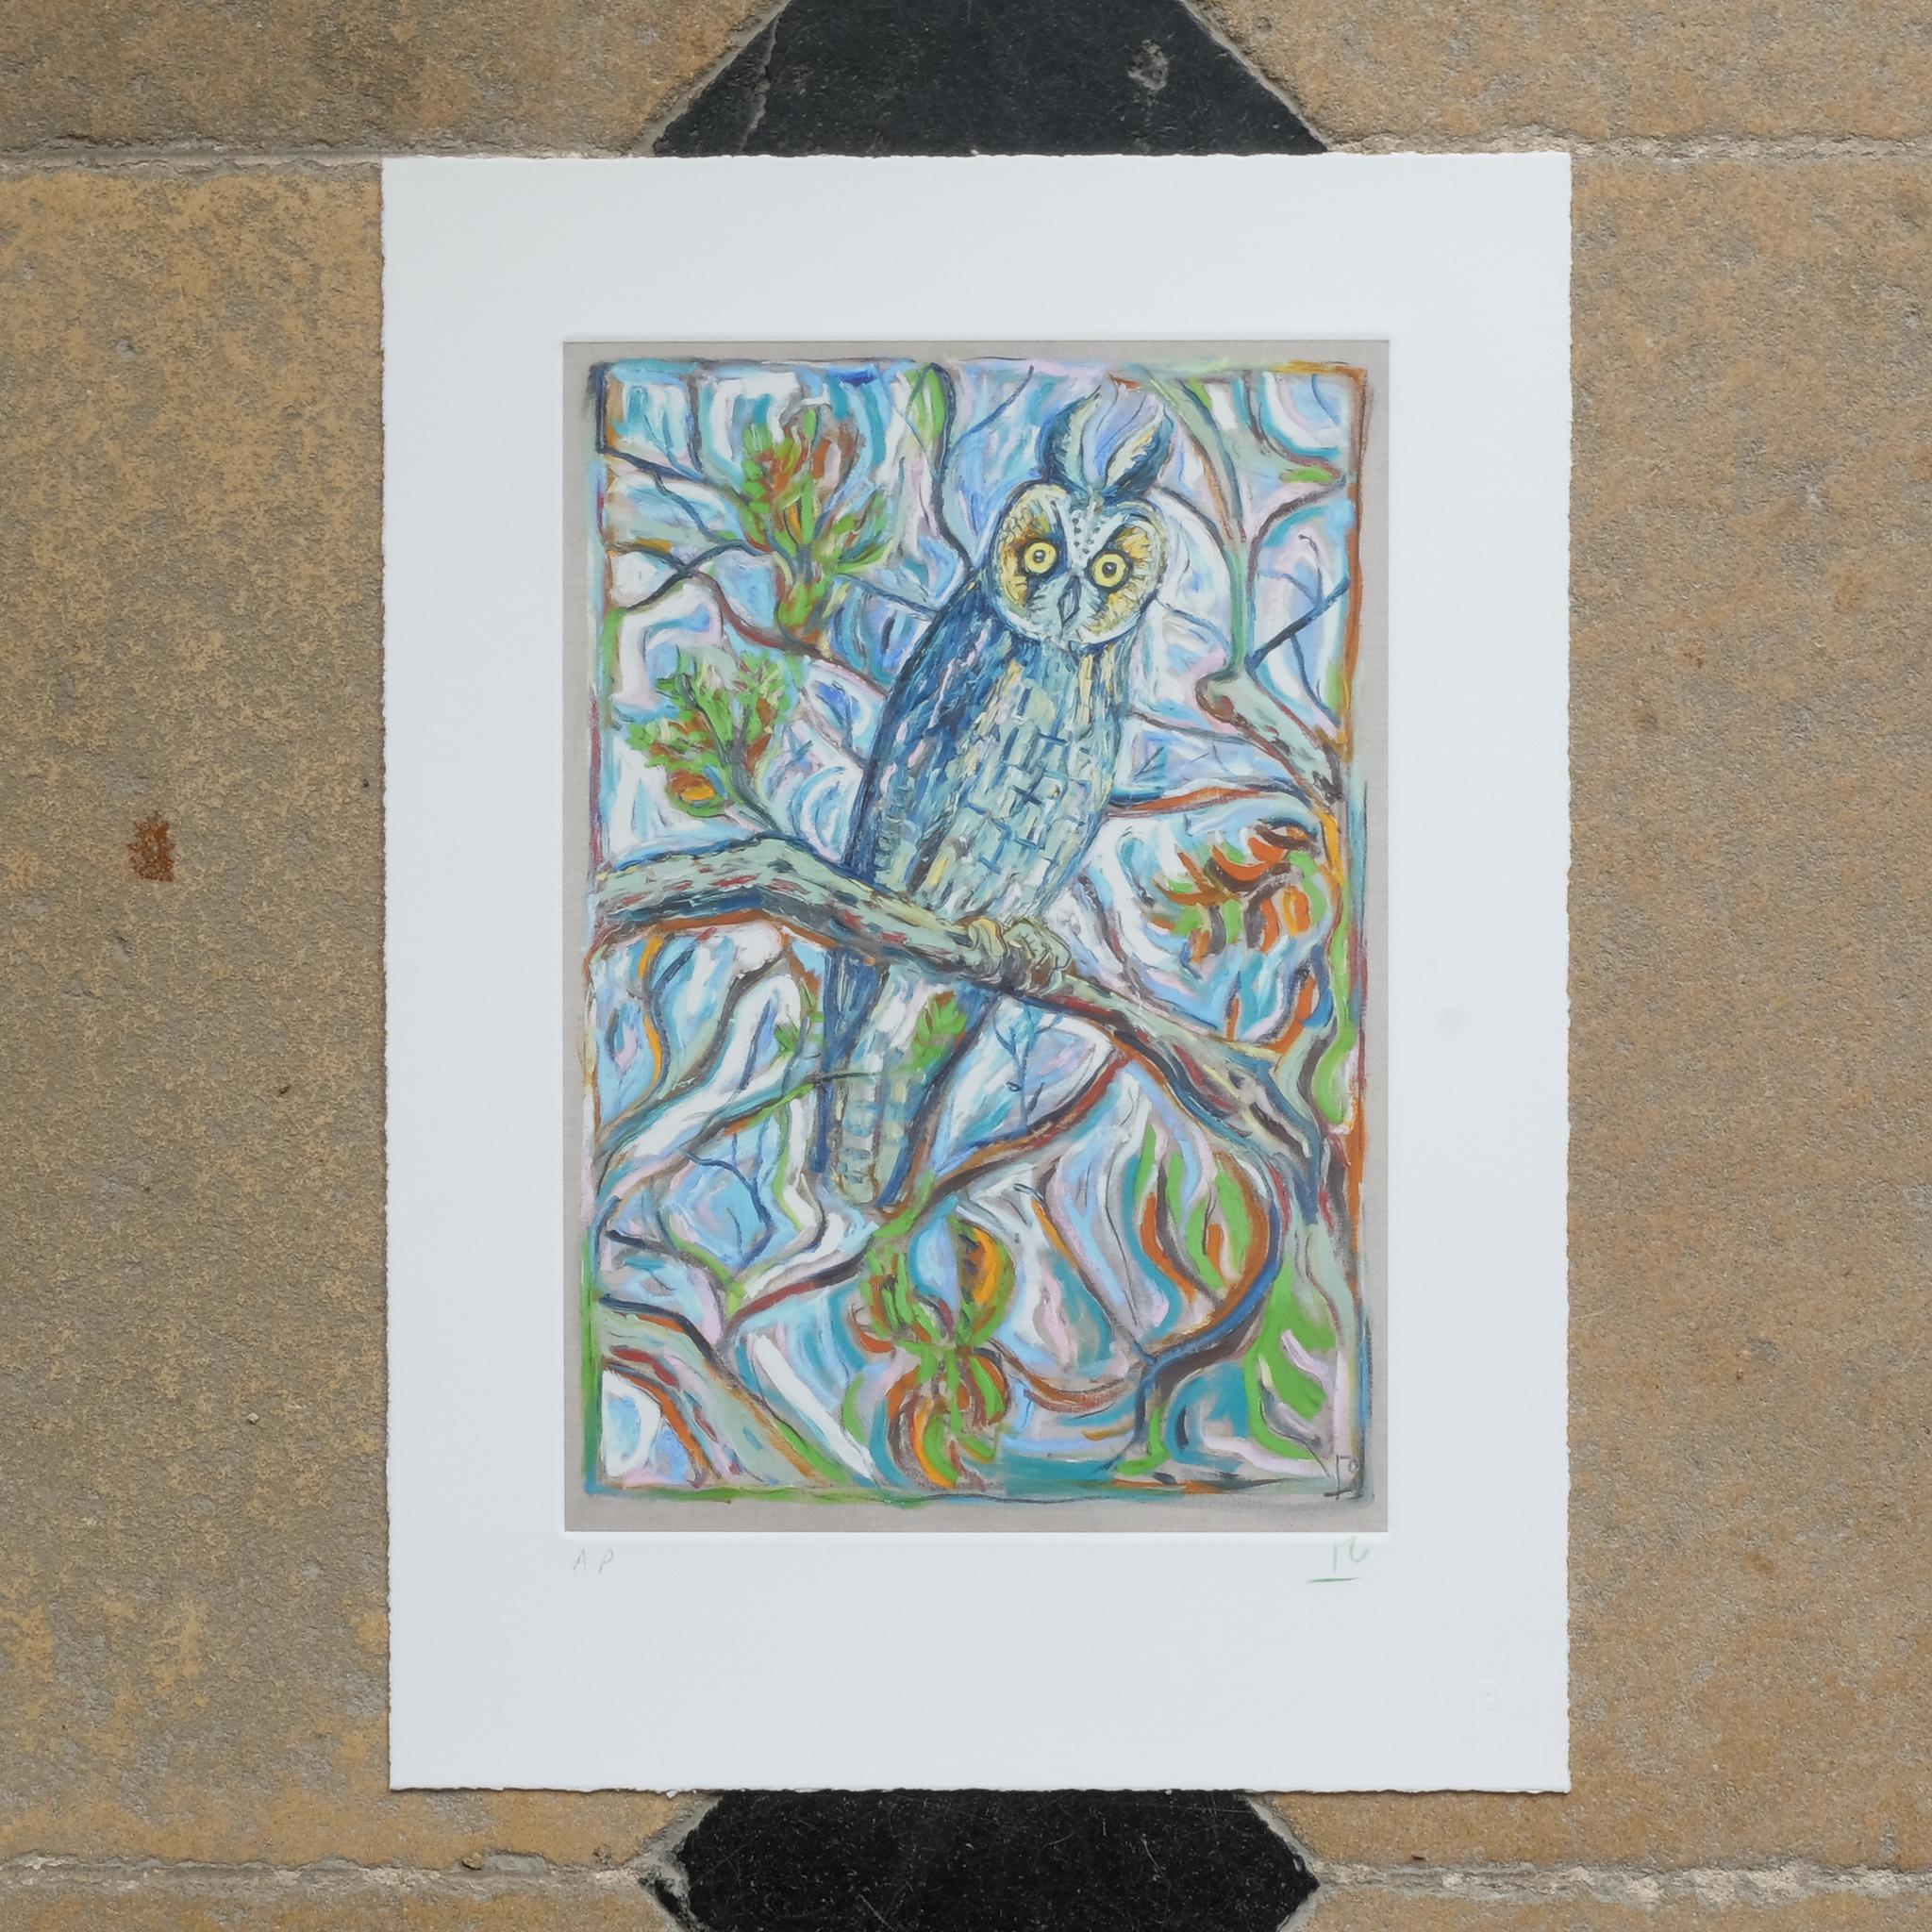 Giclee print in colours with screenprinted varnish, 2011, on Somerset 330gsm paper, initialled in green pencil, inscribed ‘AP’ (an artist’s proof aside from the edition of 125), from the portfolio Ghosts of Gone Birds, printed and published by